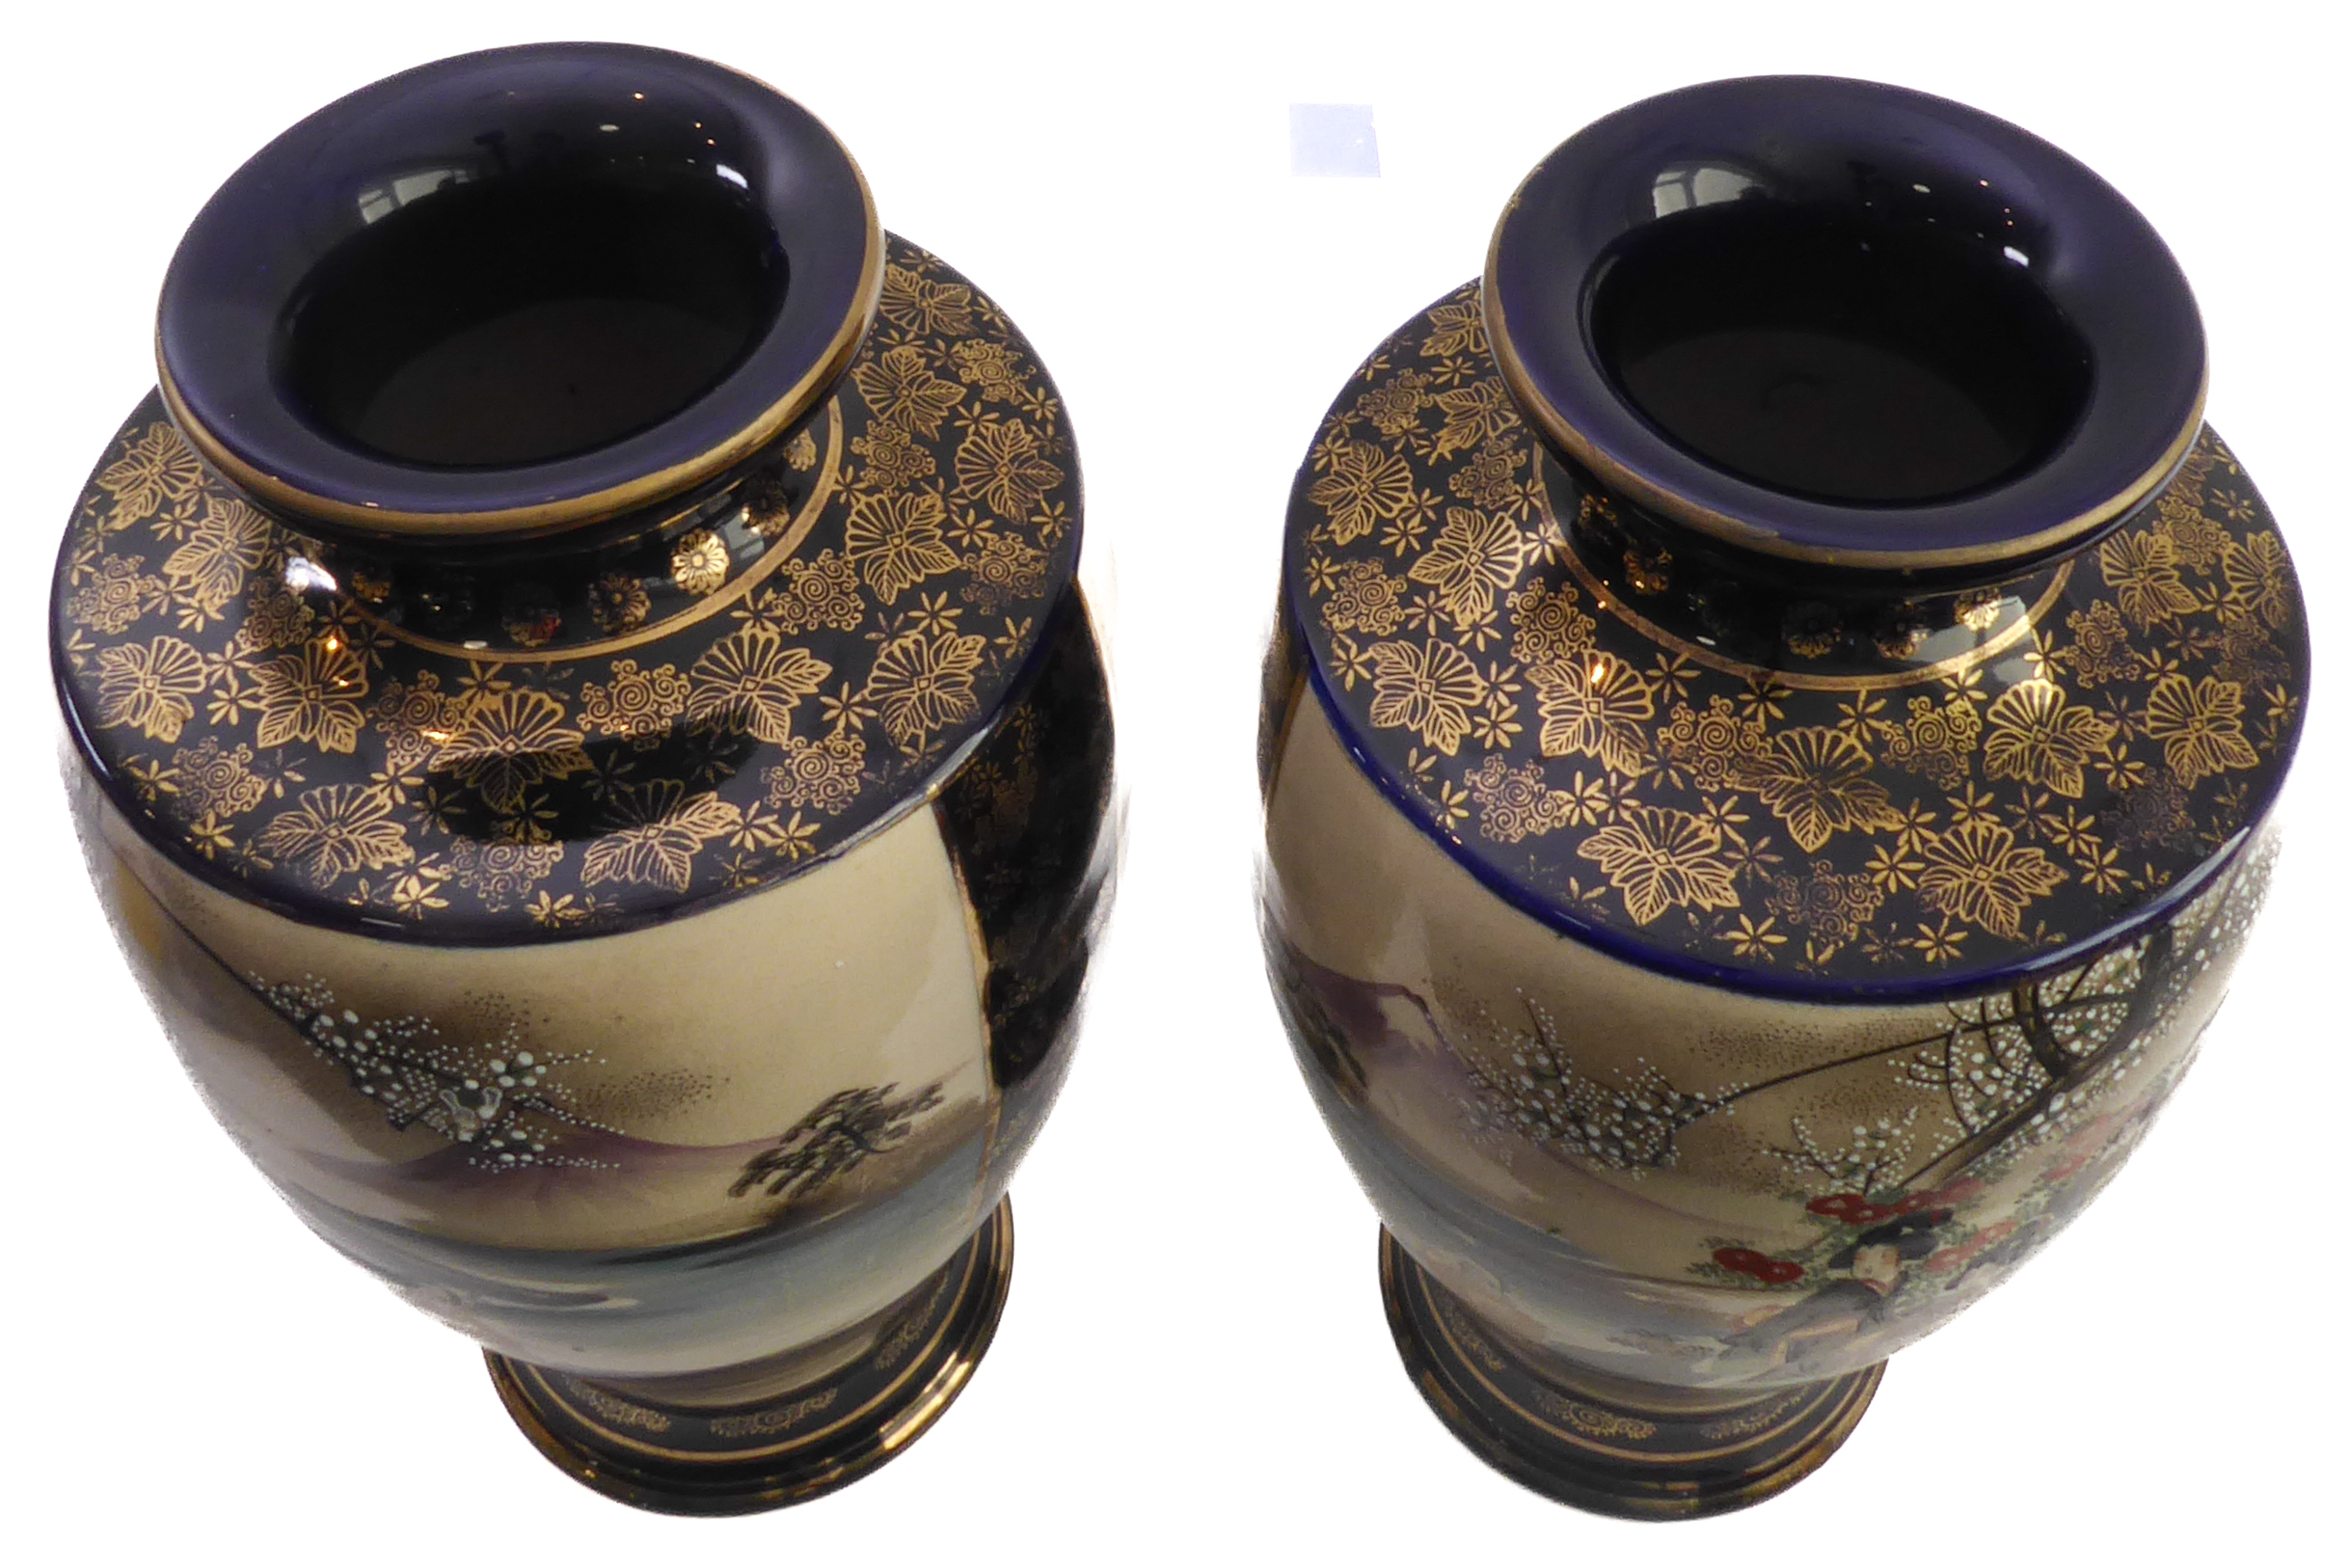 An opposing pair of early 20th century Japanese pottery vases of ovoid form - cobalt-blue-glazed - Image 6 of 7